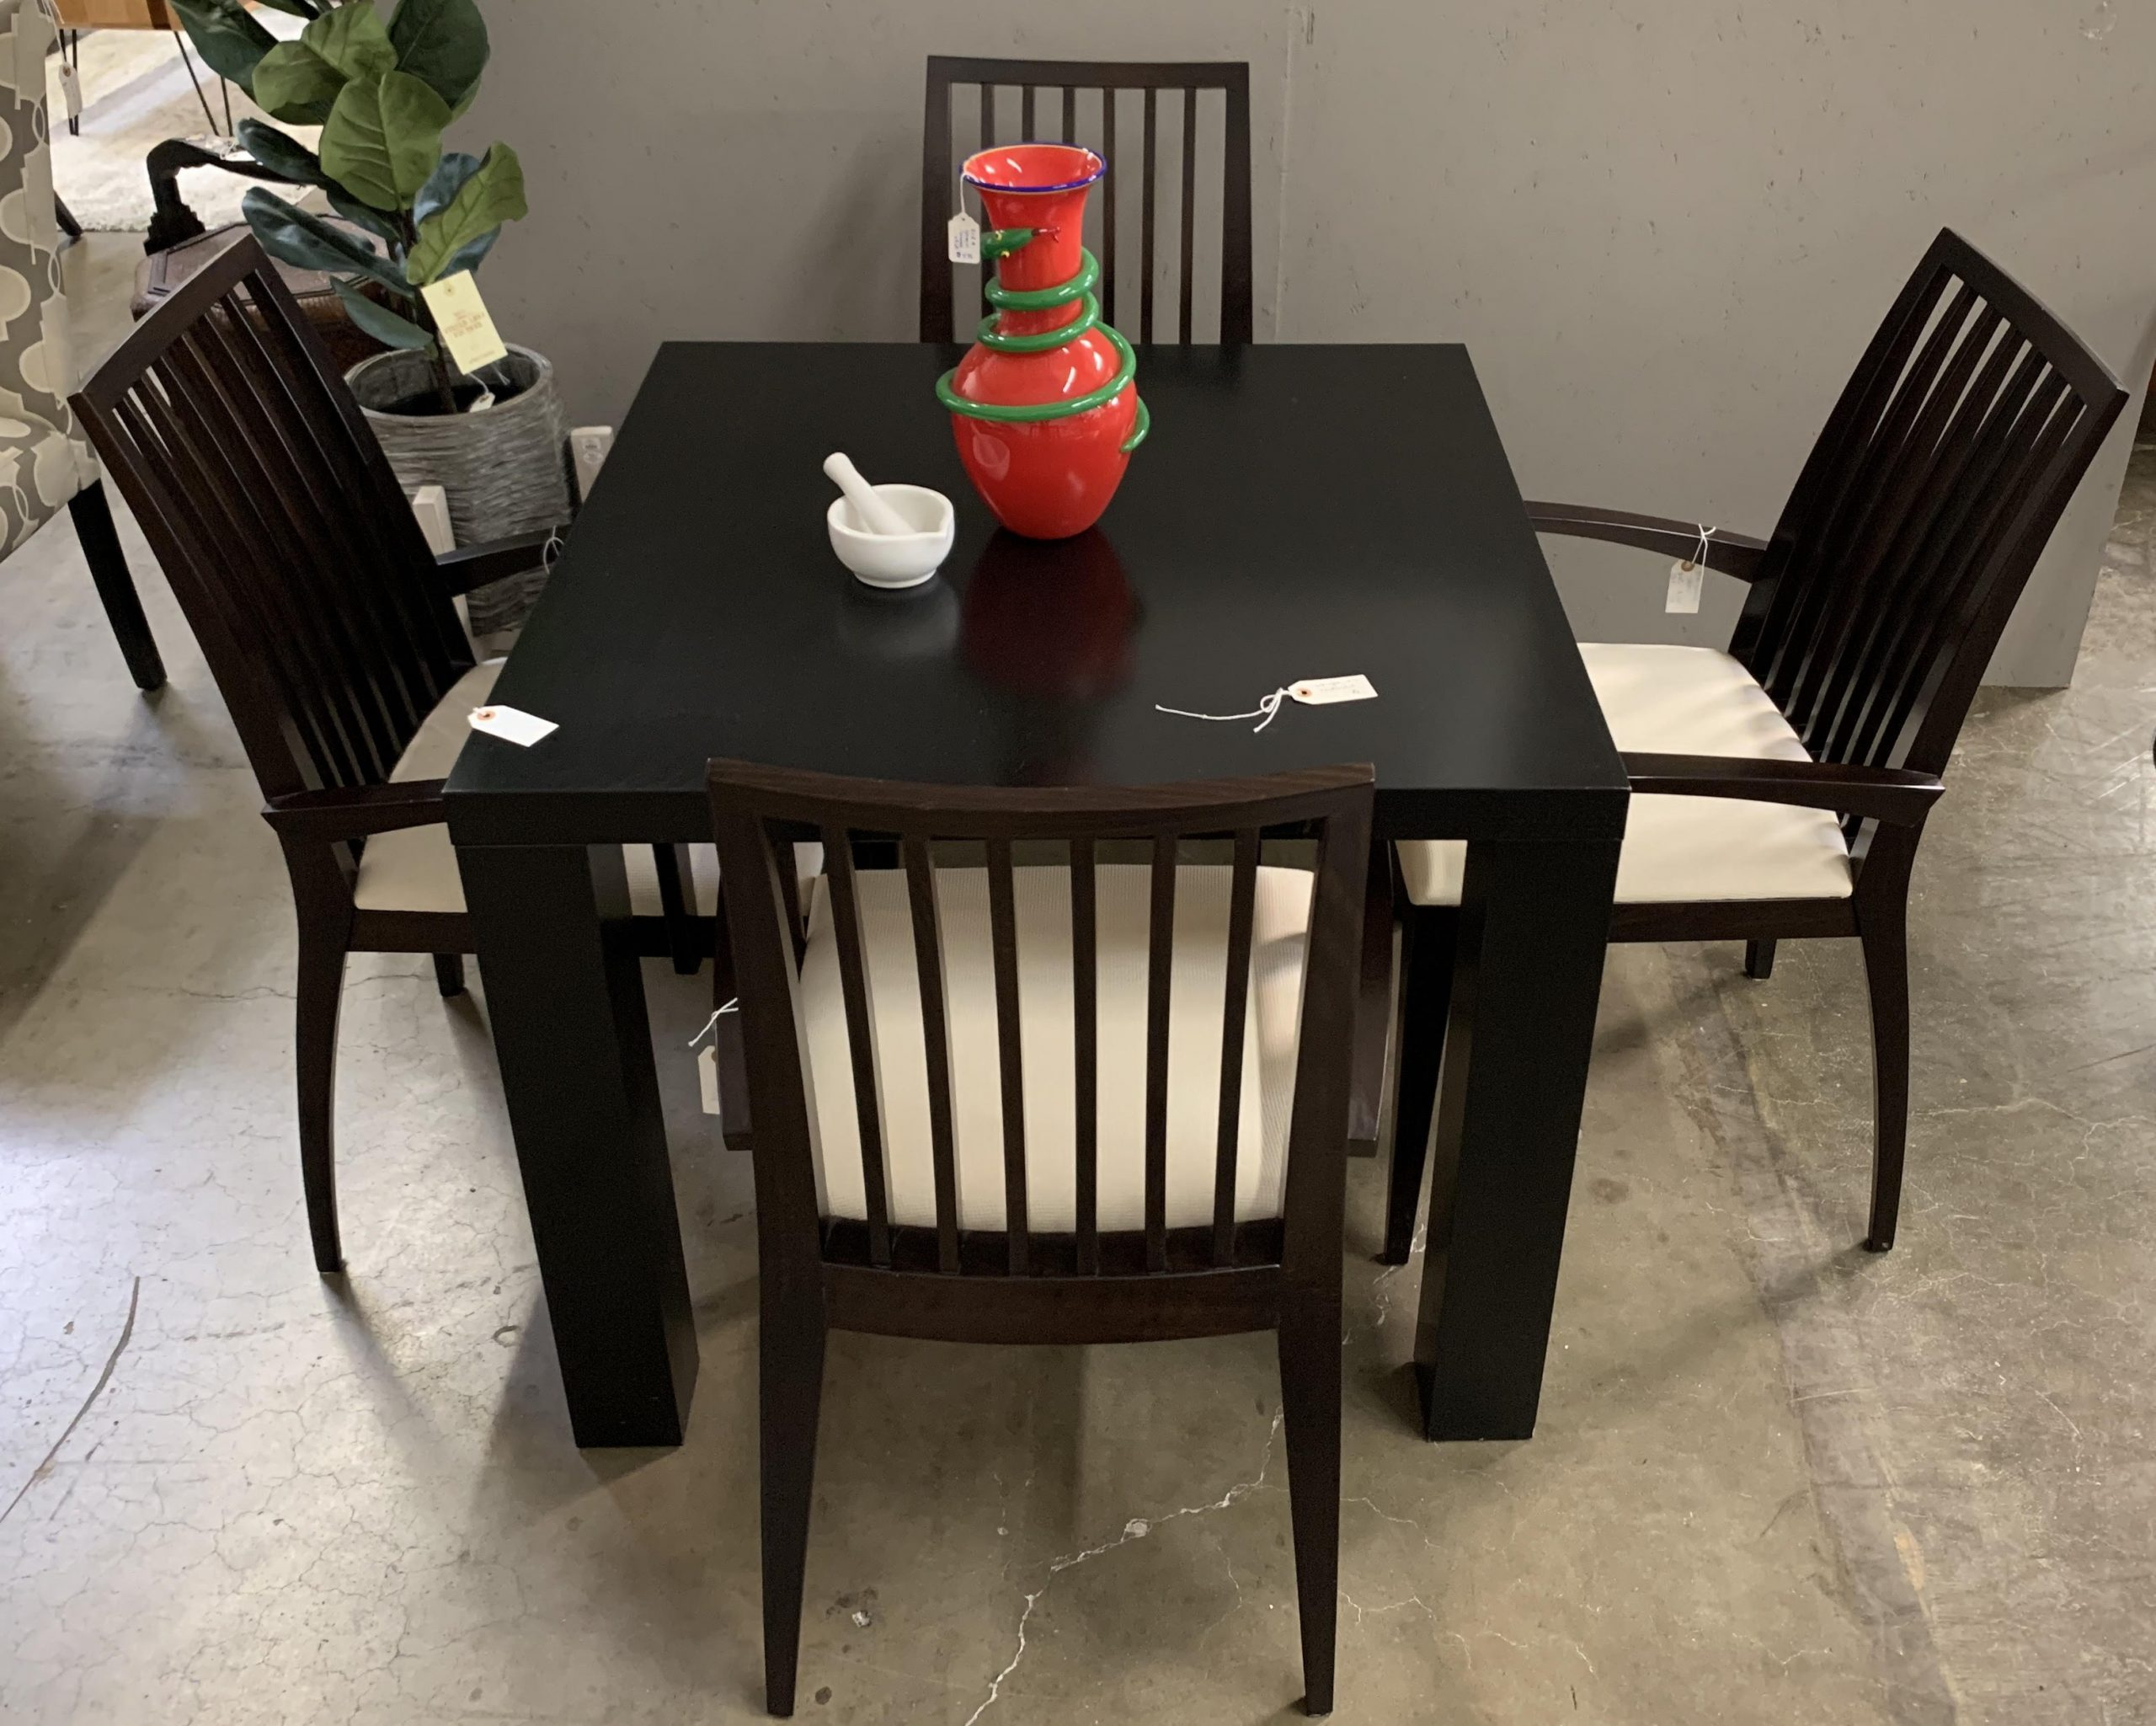 olx kitchen table and chair